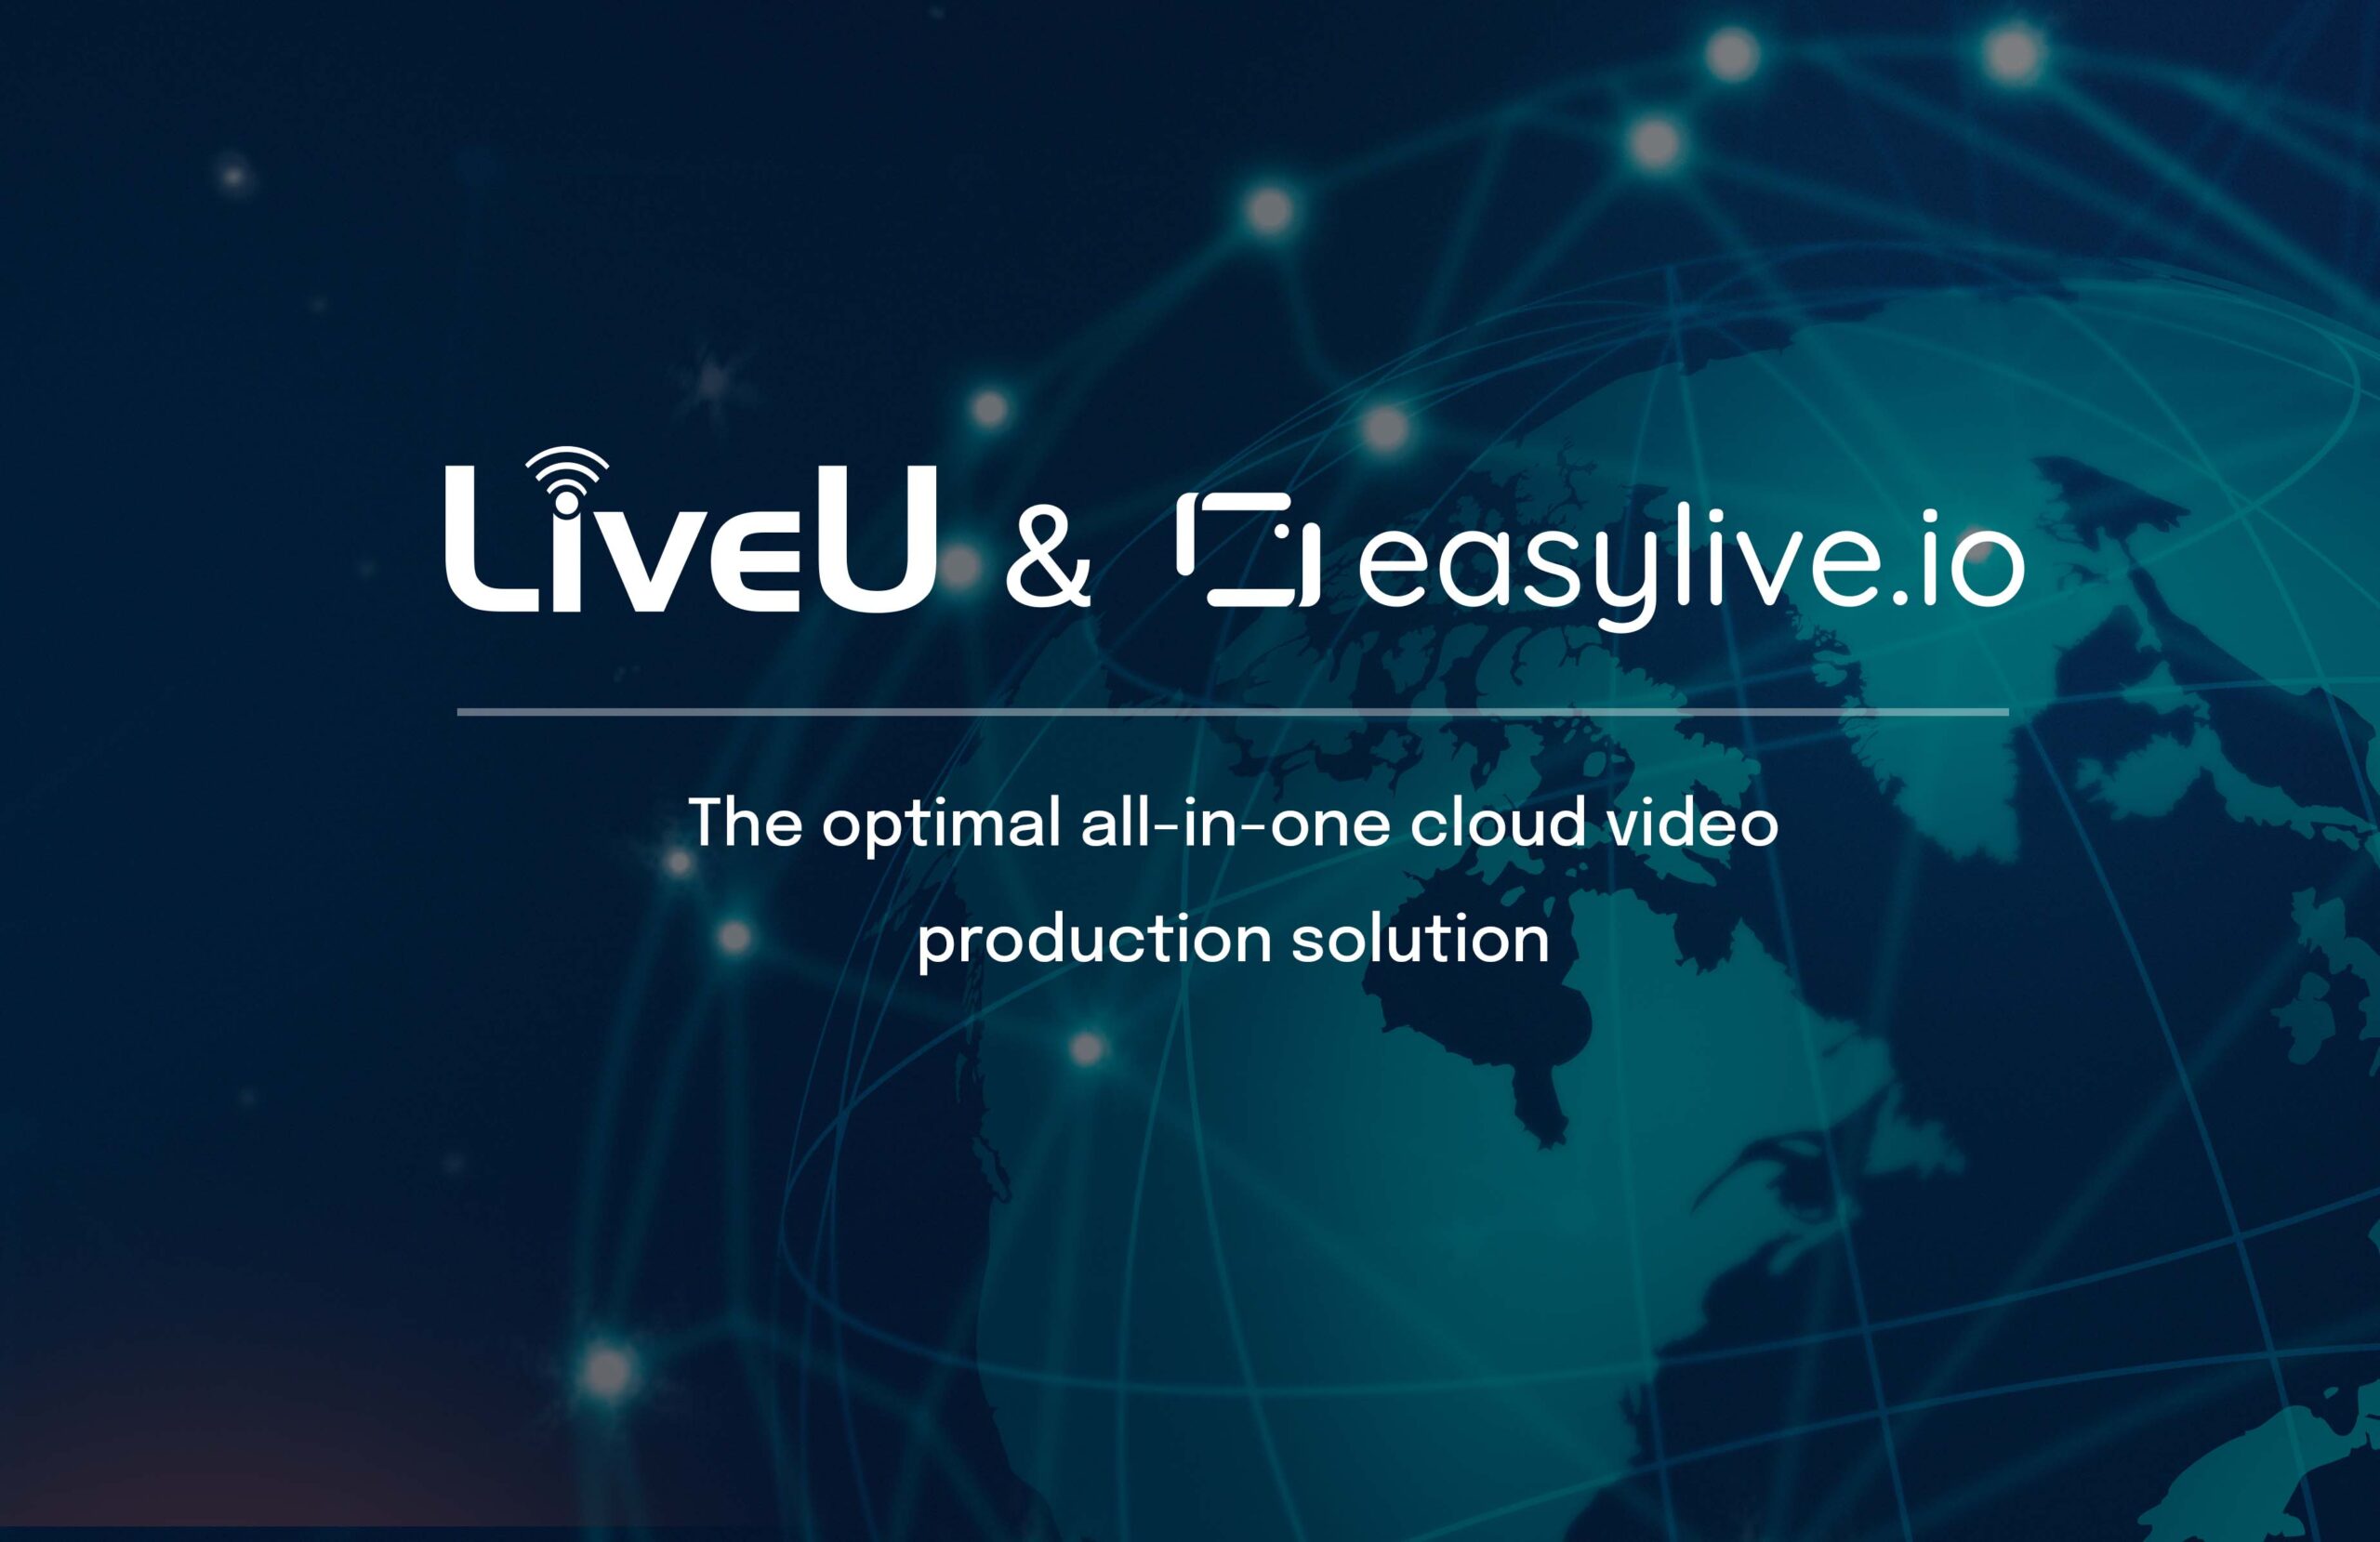 LiveU Announces the Acquisition of Cloud-based Video Production Provider easylive.io